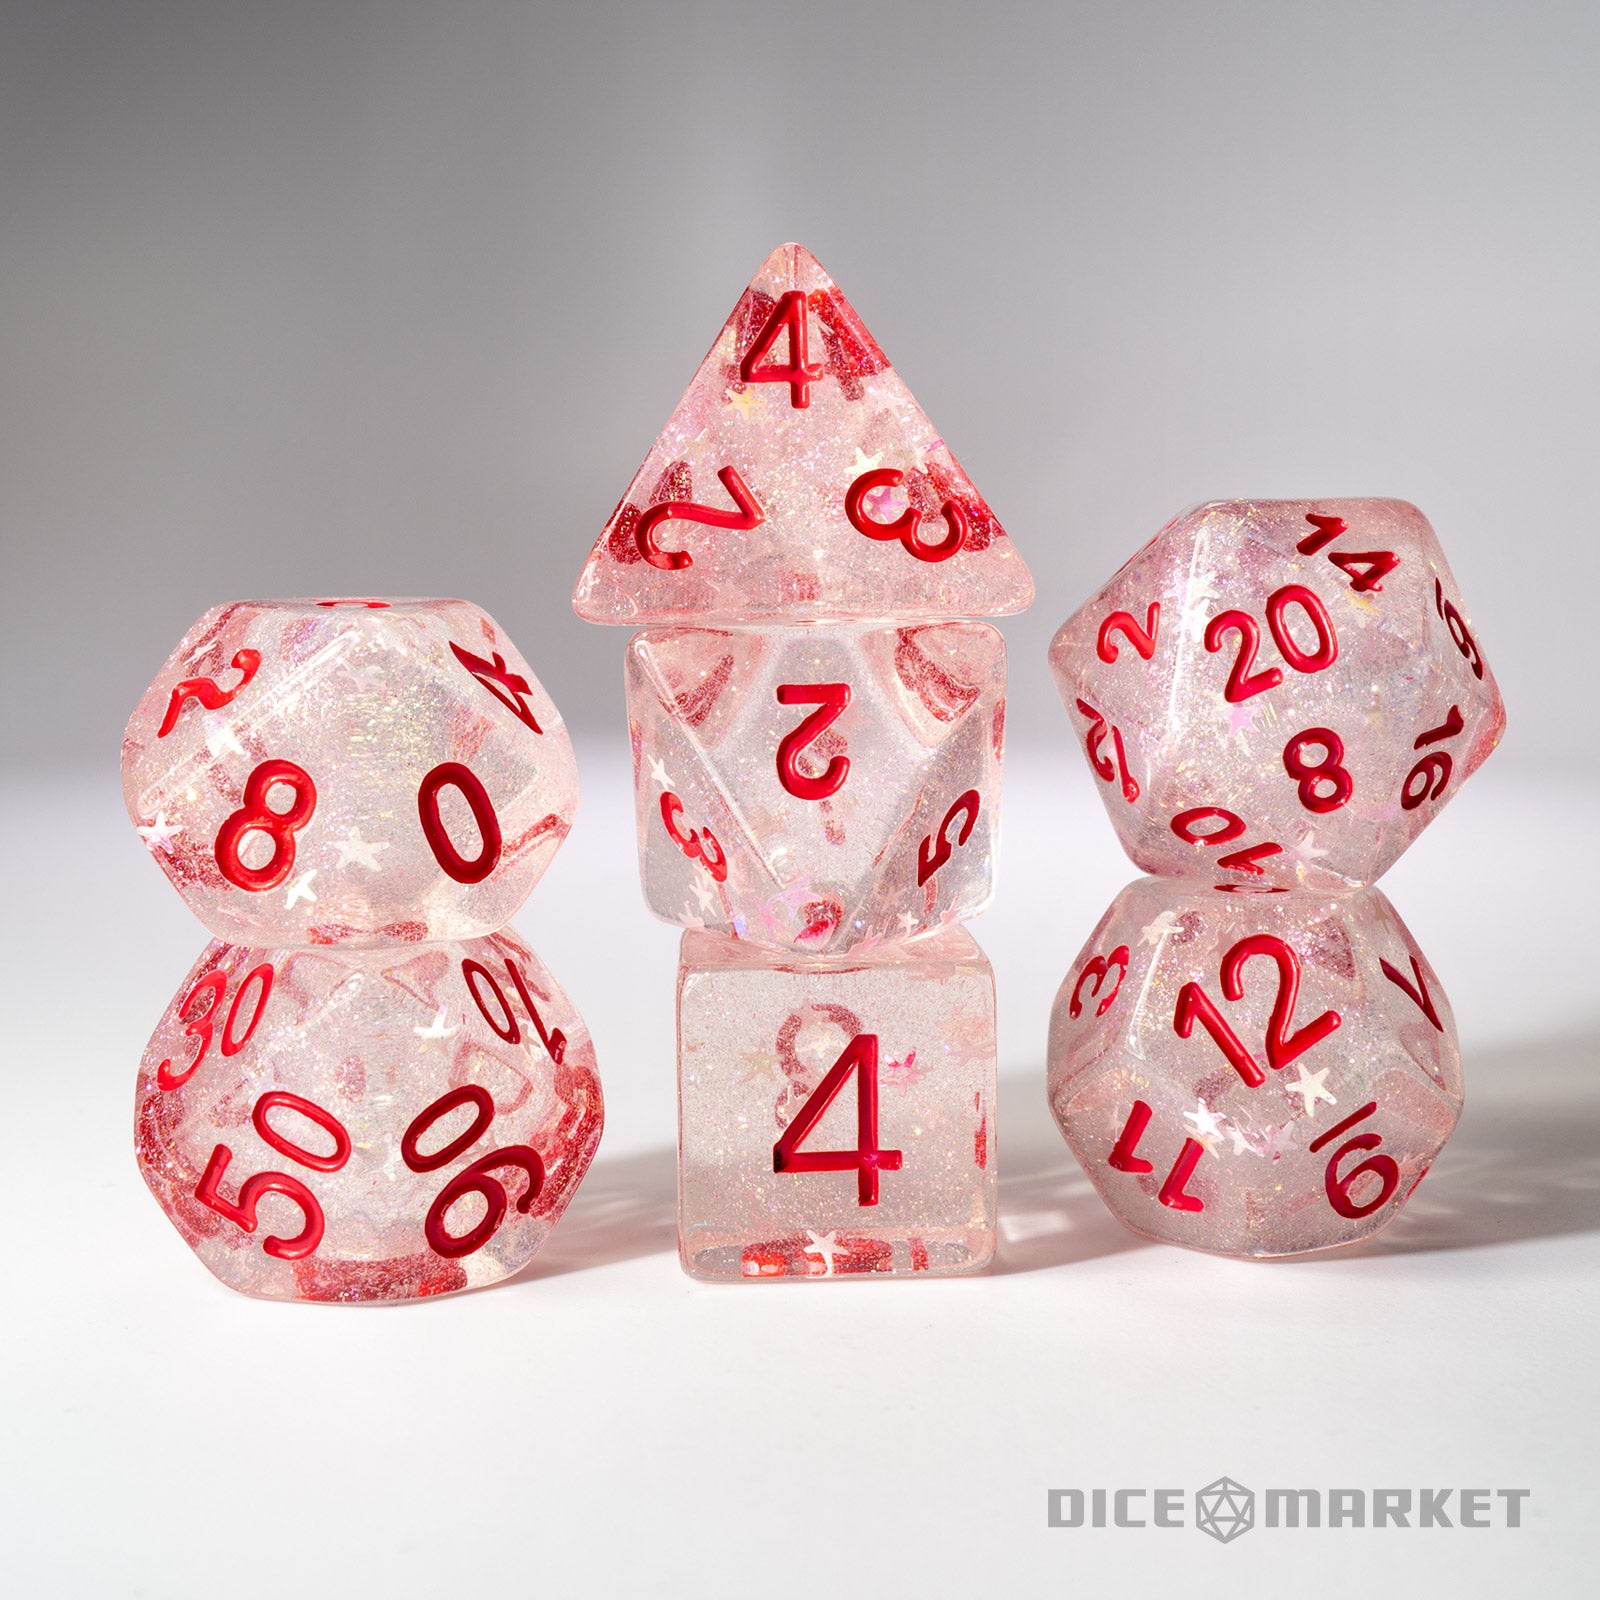 Fine White Star 7pc Dice Set Inked in Red